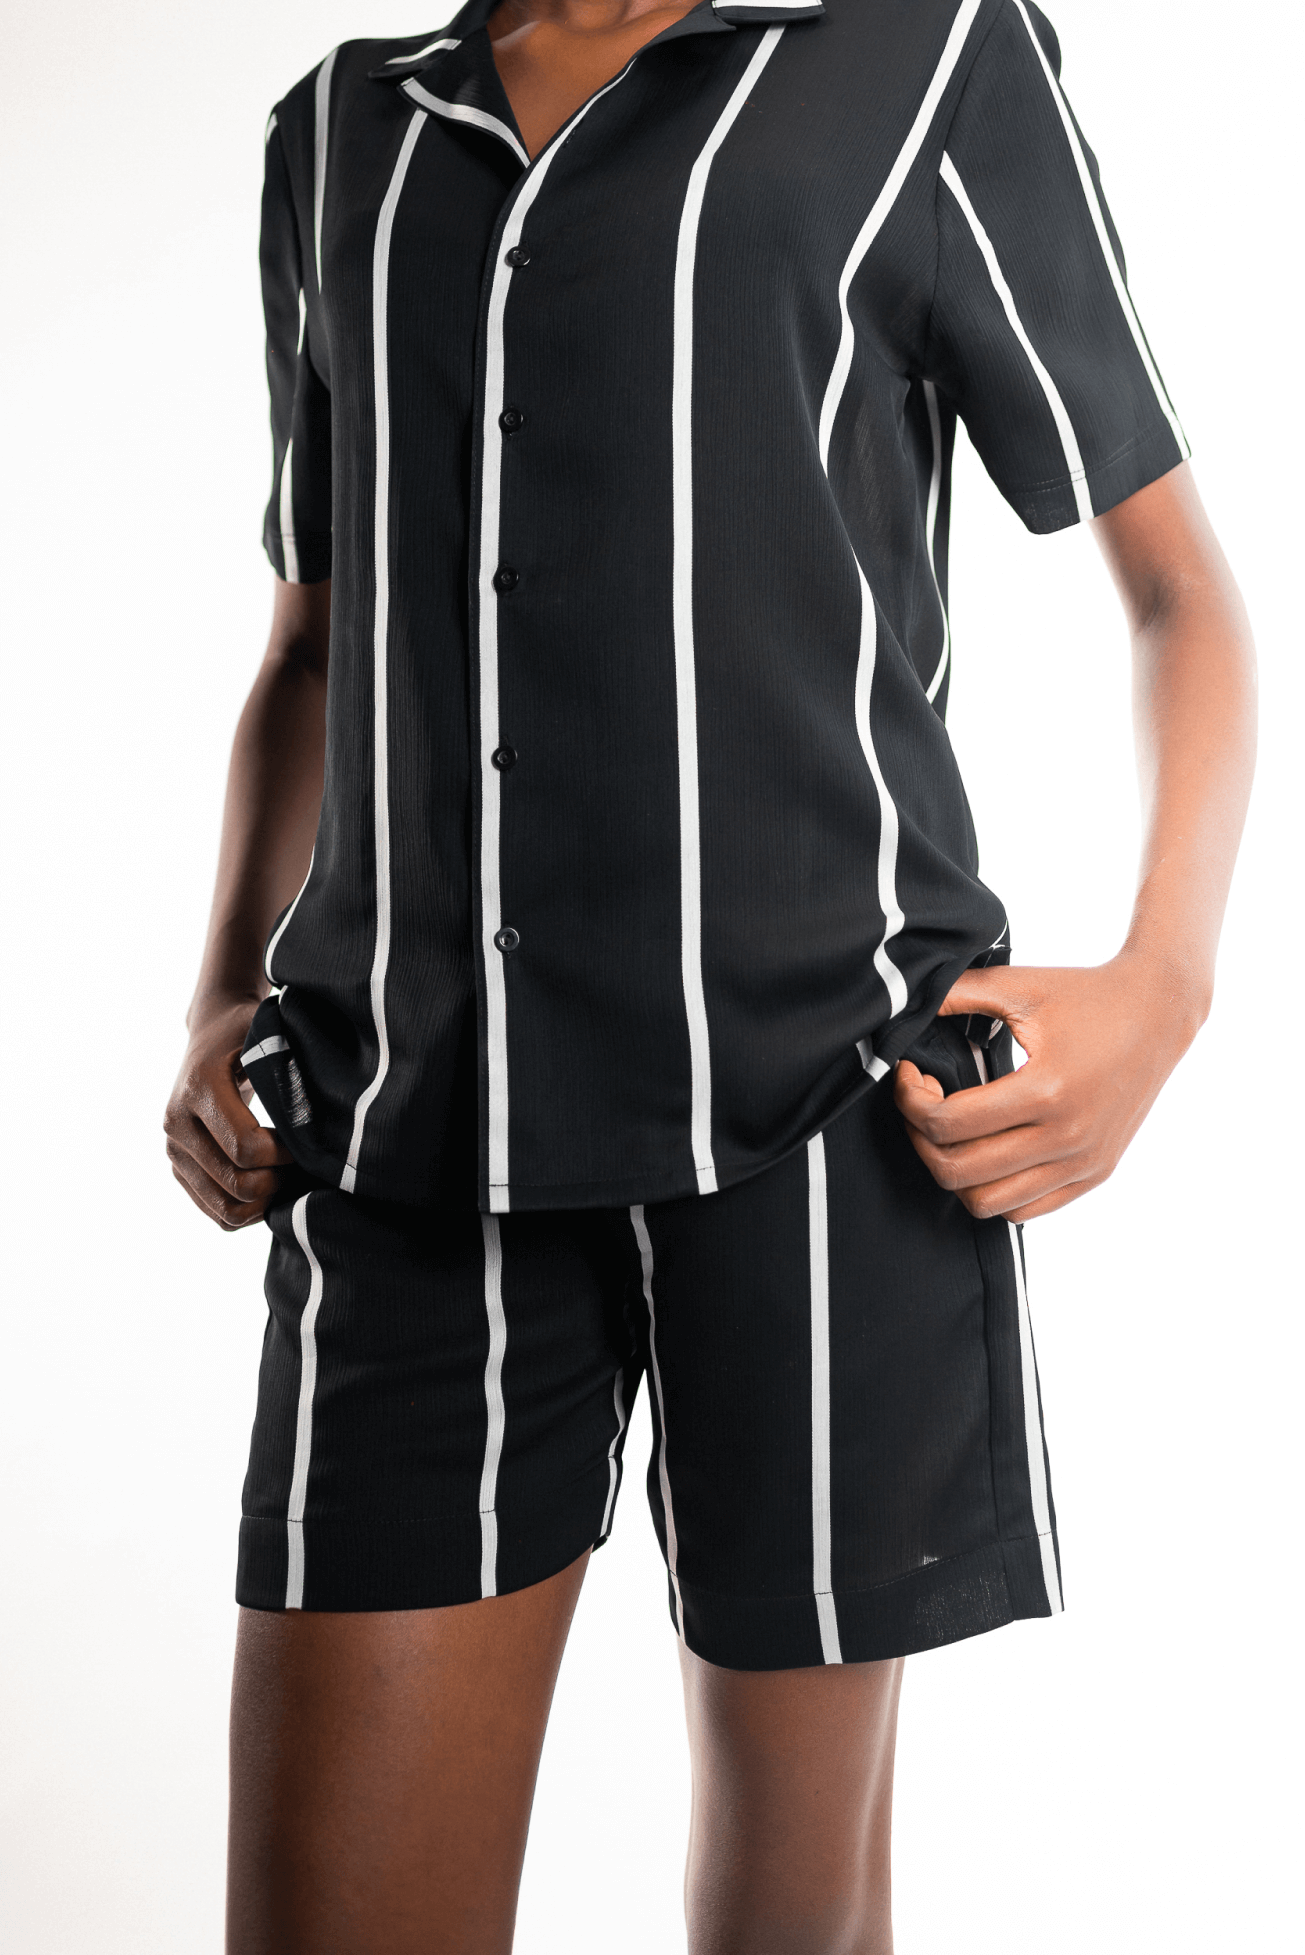 Zoom Stripes Shirt & Shorts Set - Jumpsuits & Playsuits by NC Nairobi. Shop on Arrai now! Shop the trendy NC Nairobi Zoom Stripes Short & Sleeve Shirt Set on Arrai. Made of lightweight fabric with stylish stripes, available in black/silver or grey/silver.